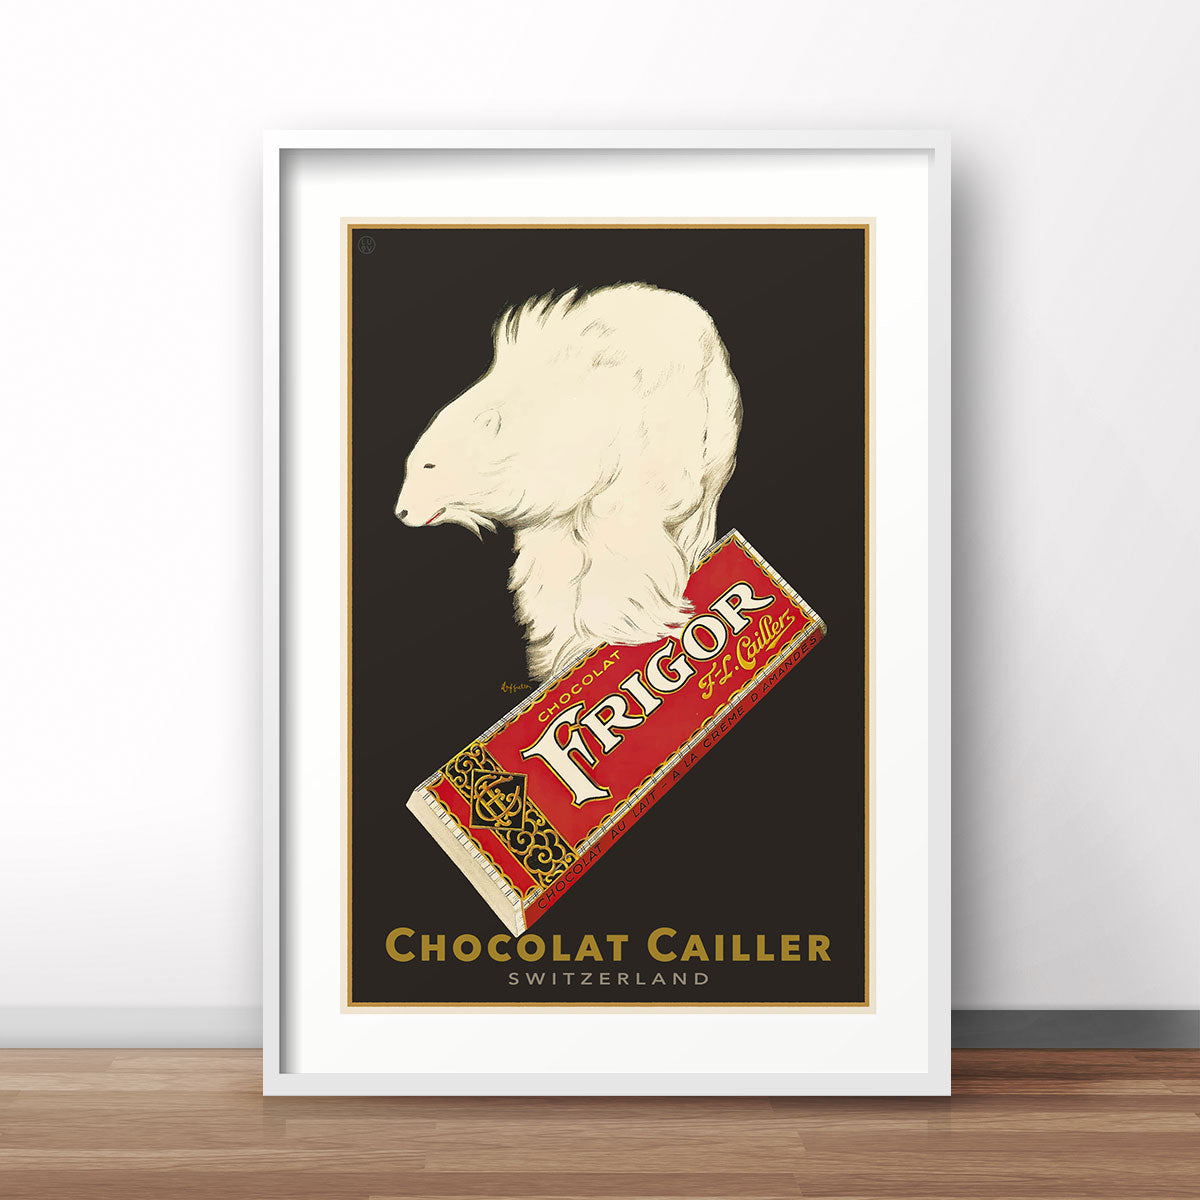 Chocolat Cailler retro advertising poster from Places We Luv